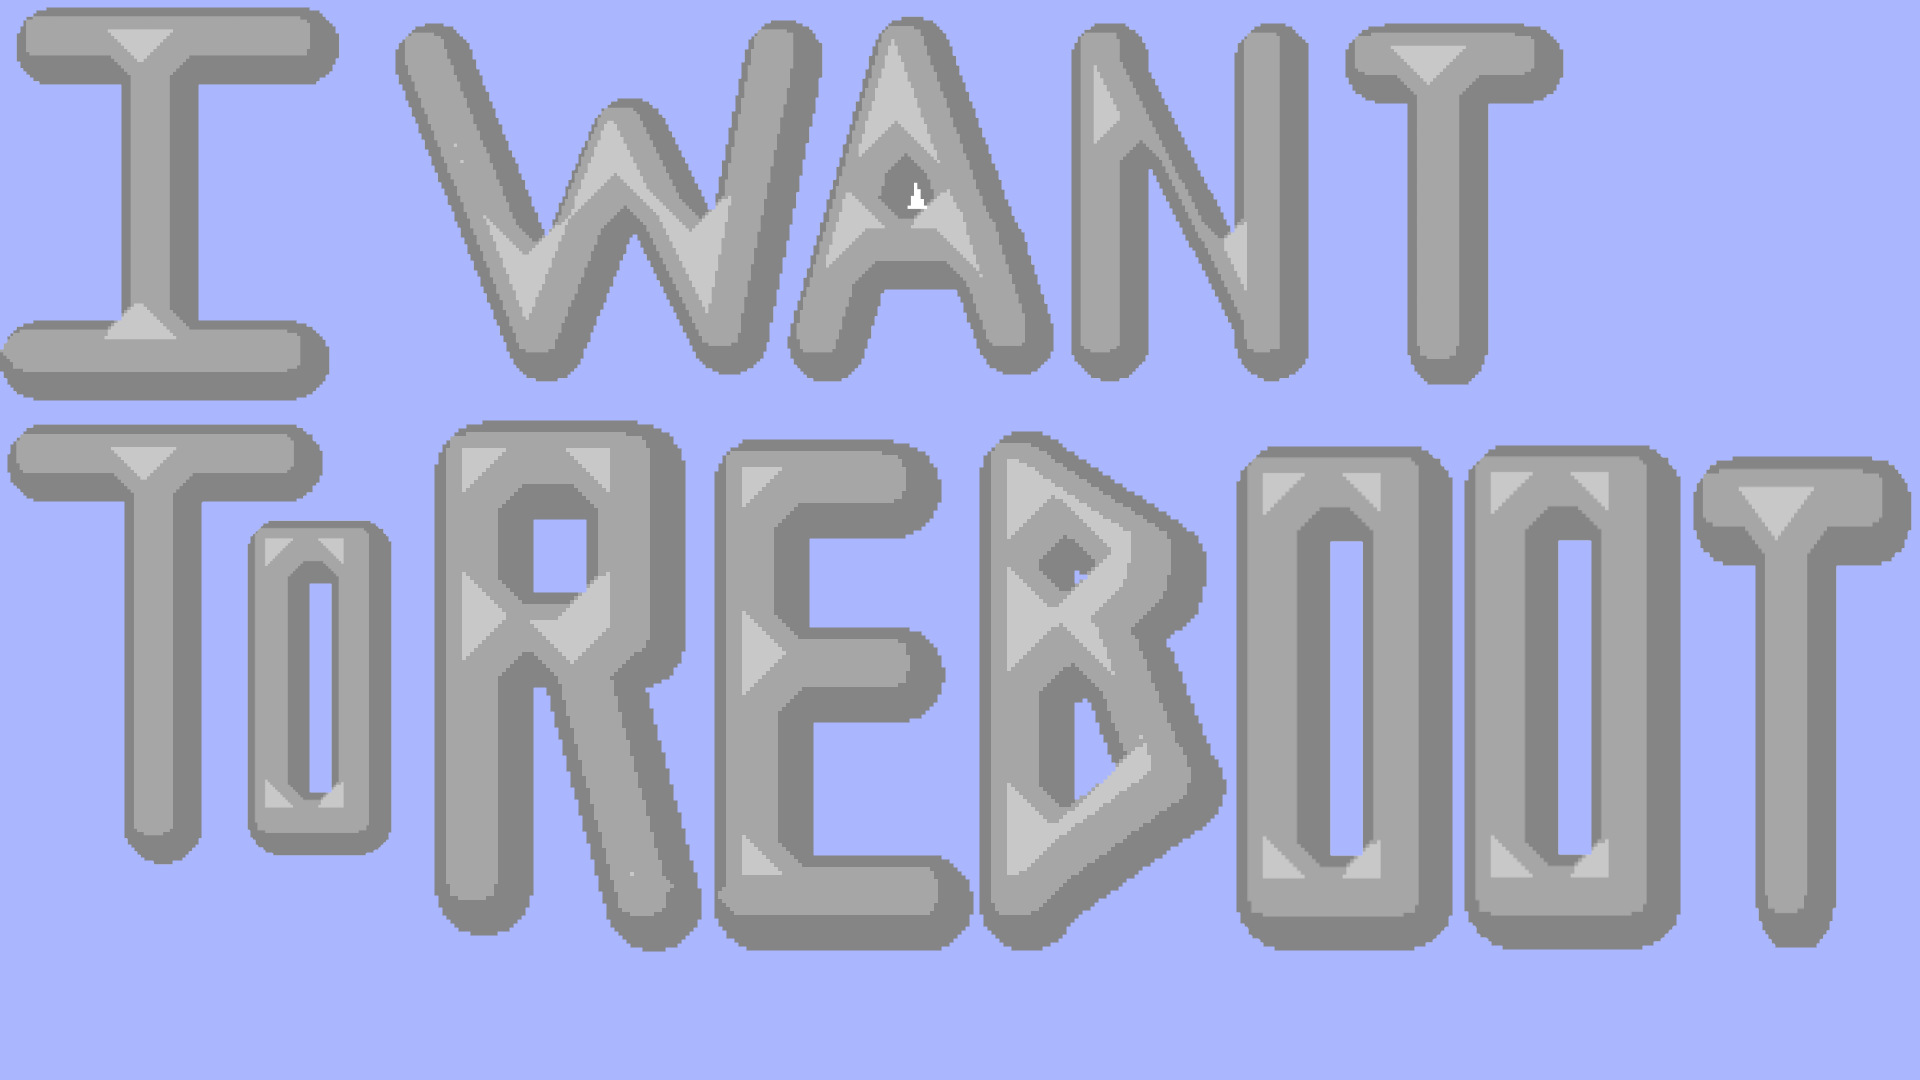 I want to REBOOT